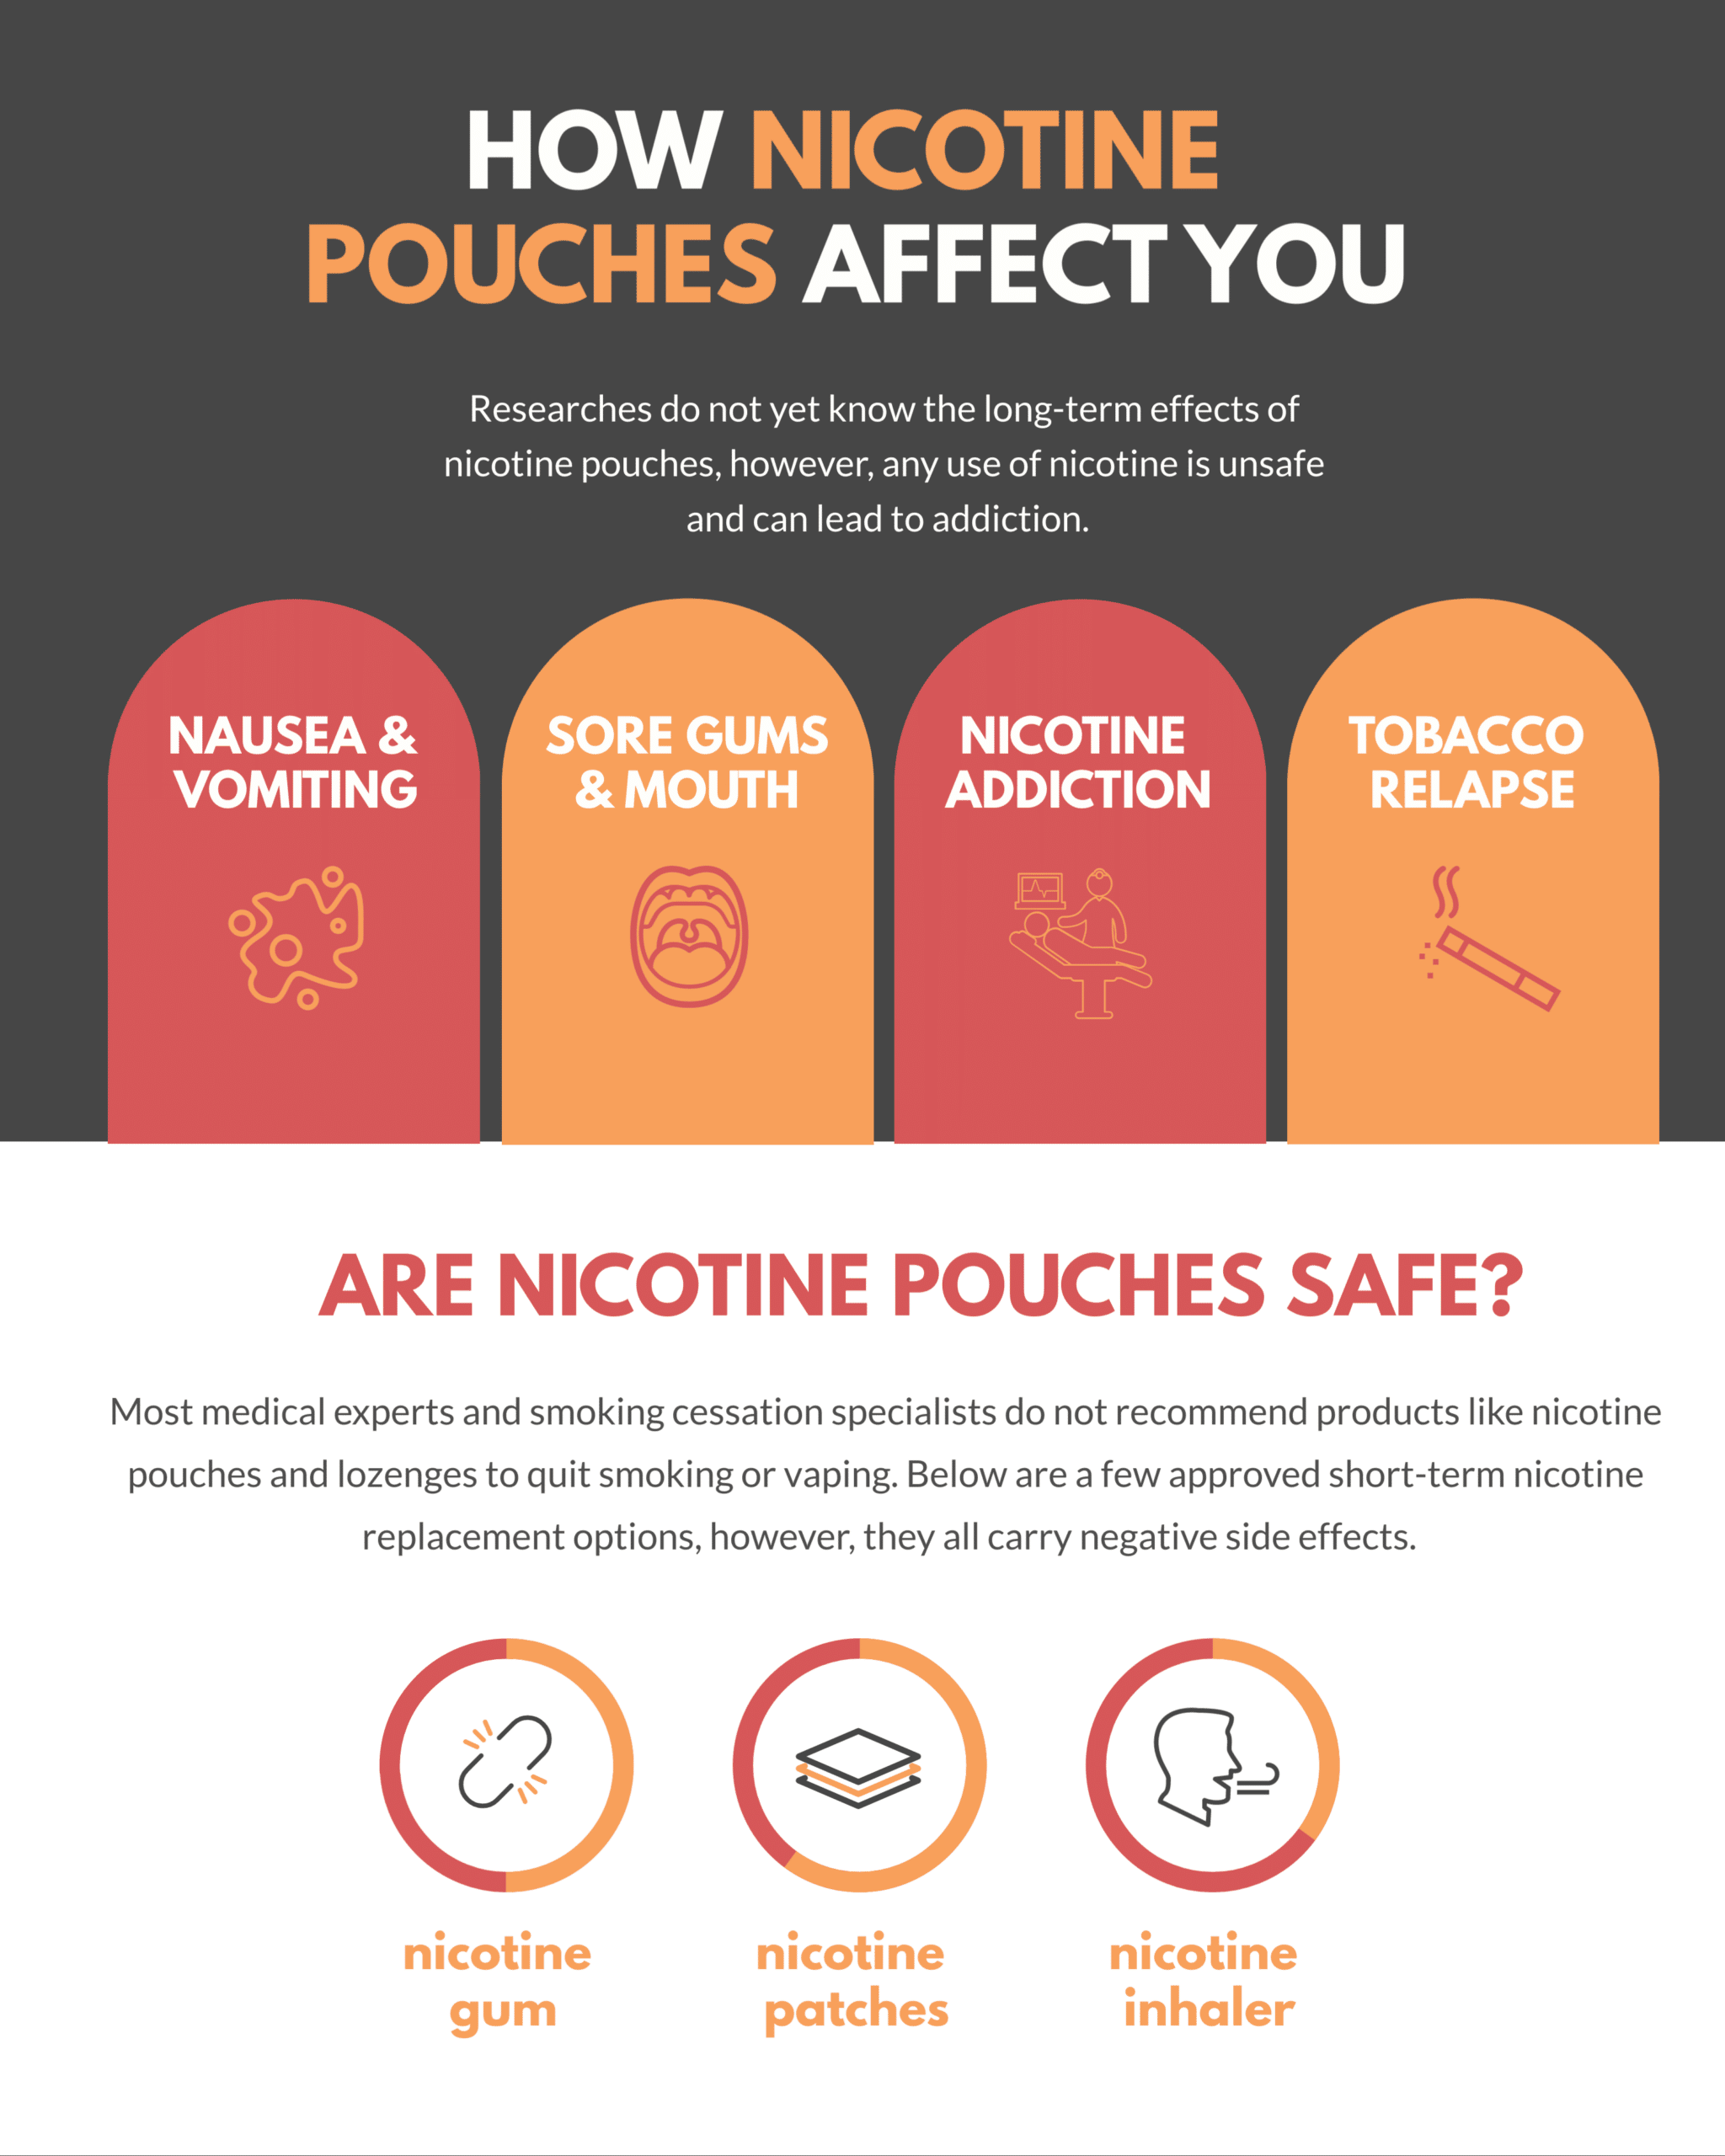 Are Nicotine Pouches Bad for You?